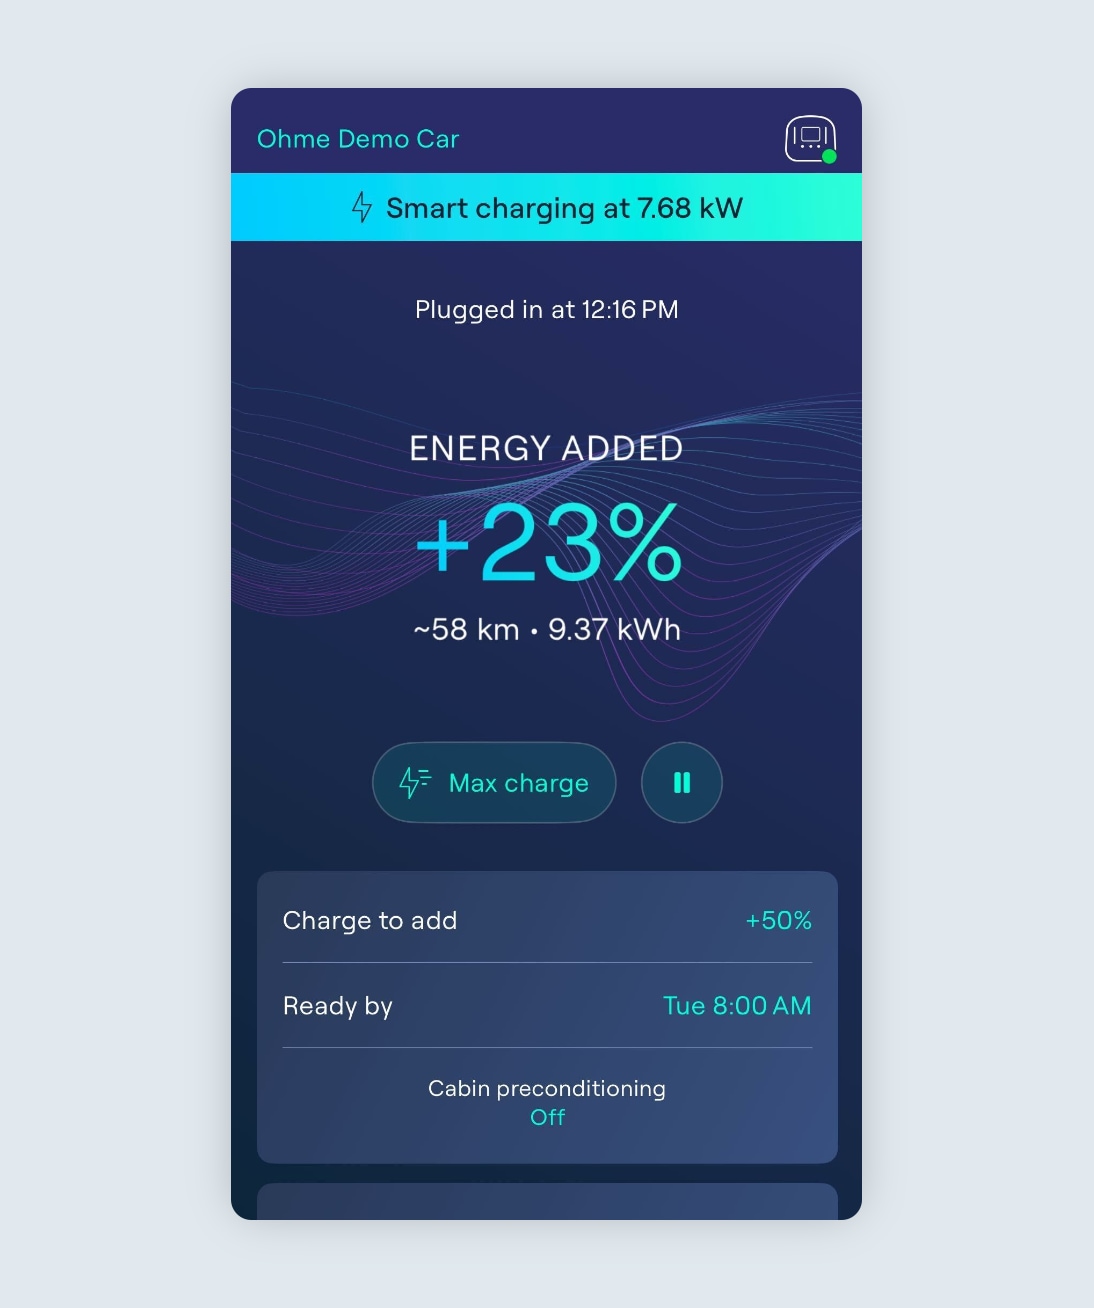 Ohme app Charging screen showing an active session with 23% charge added